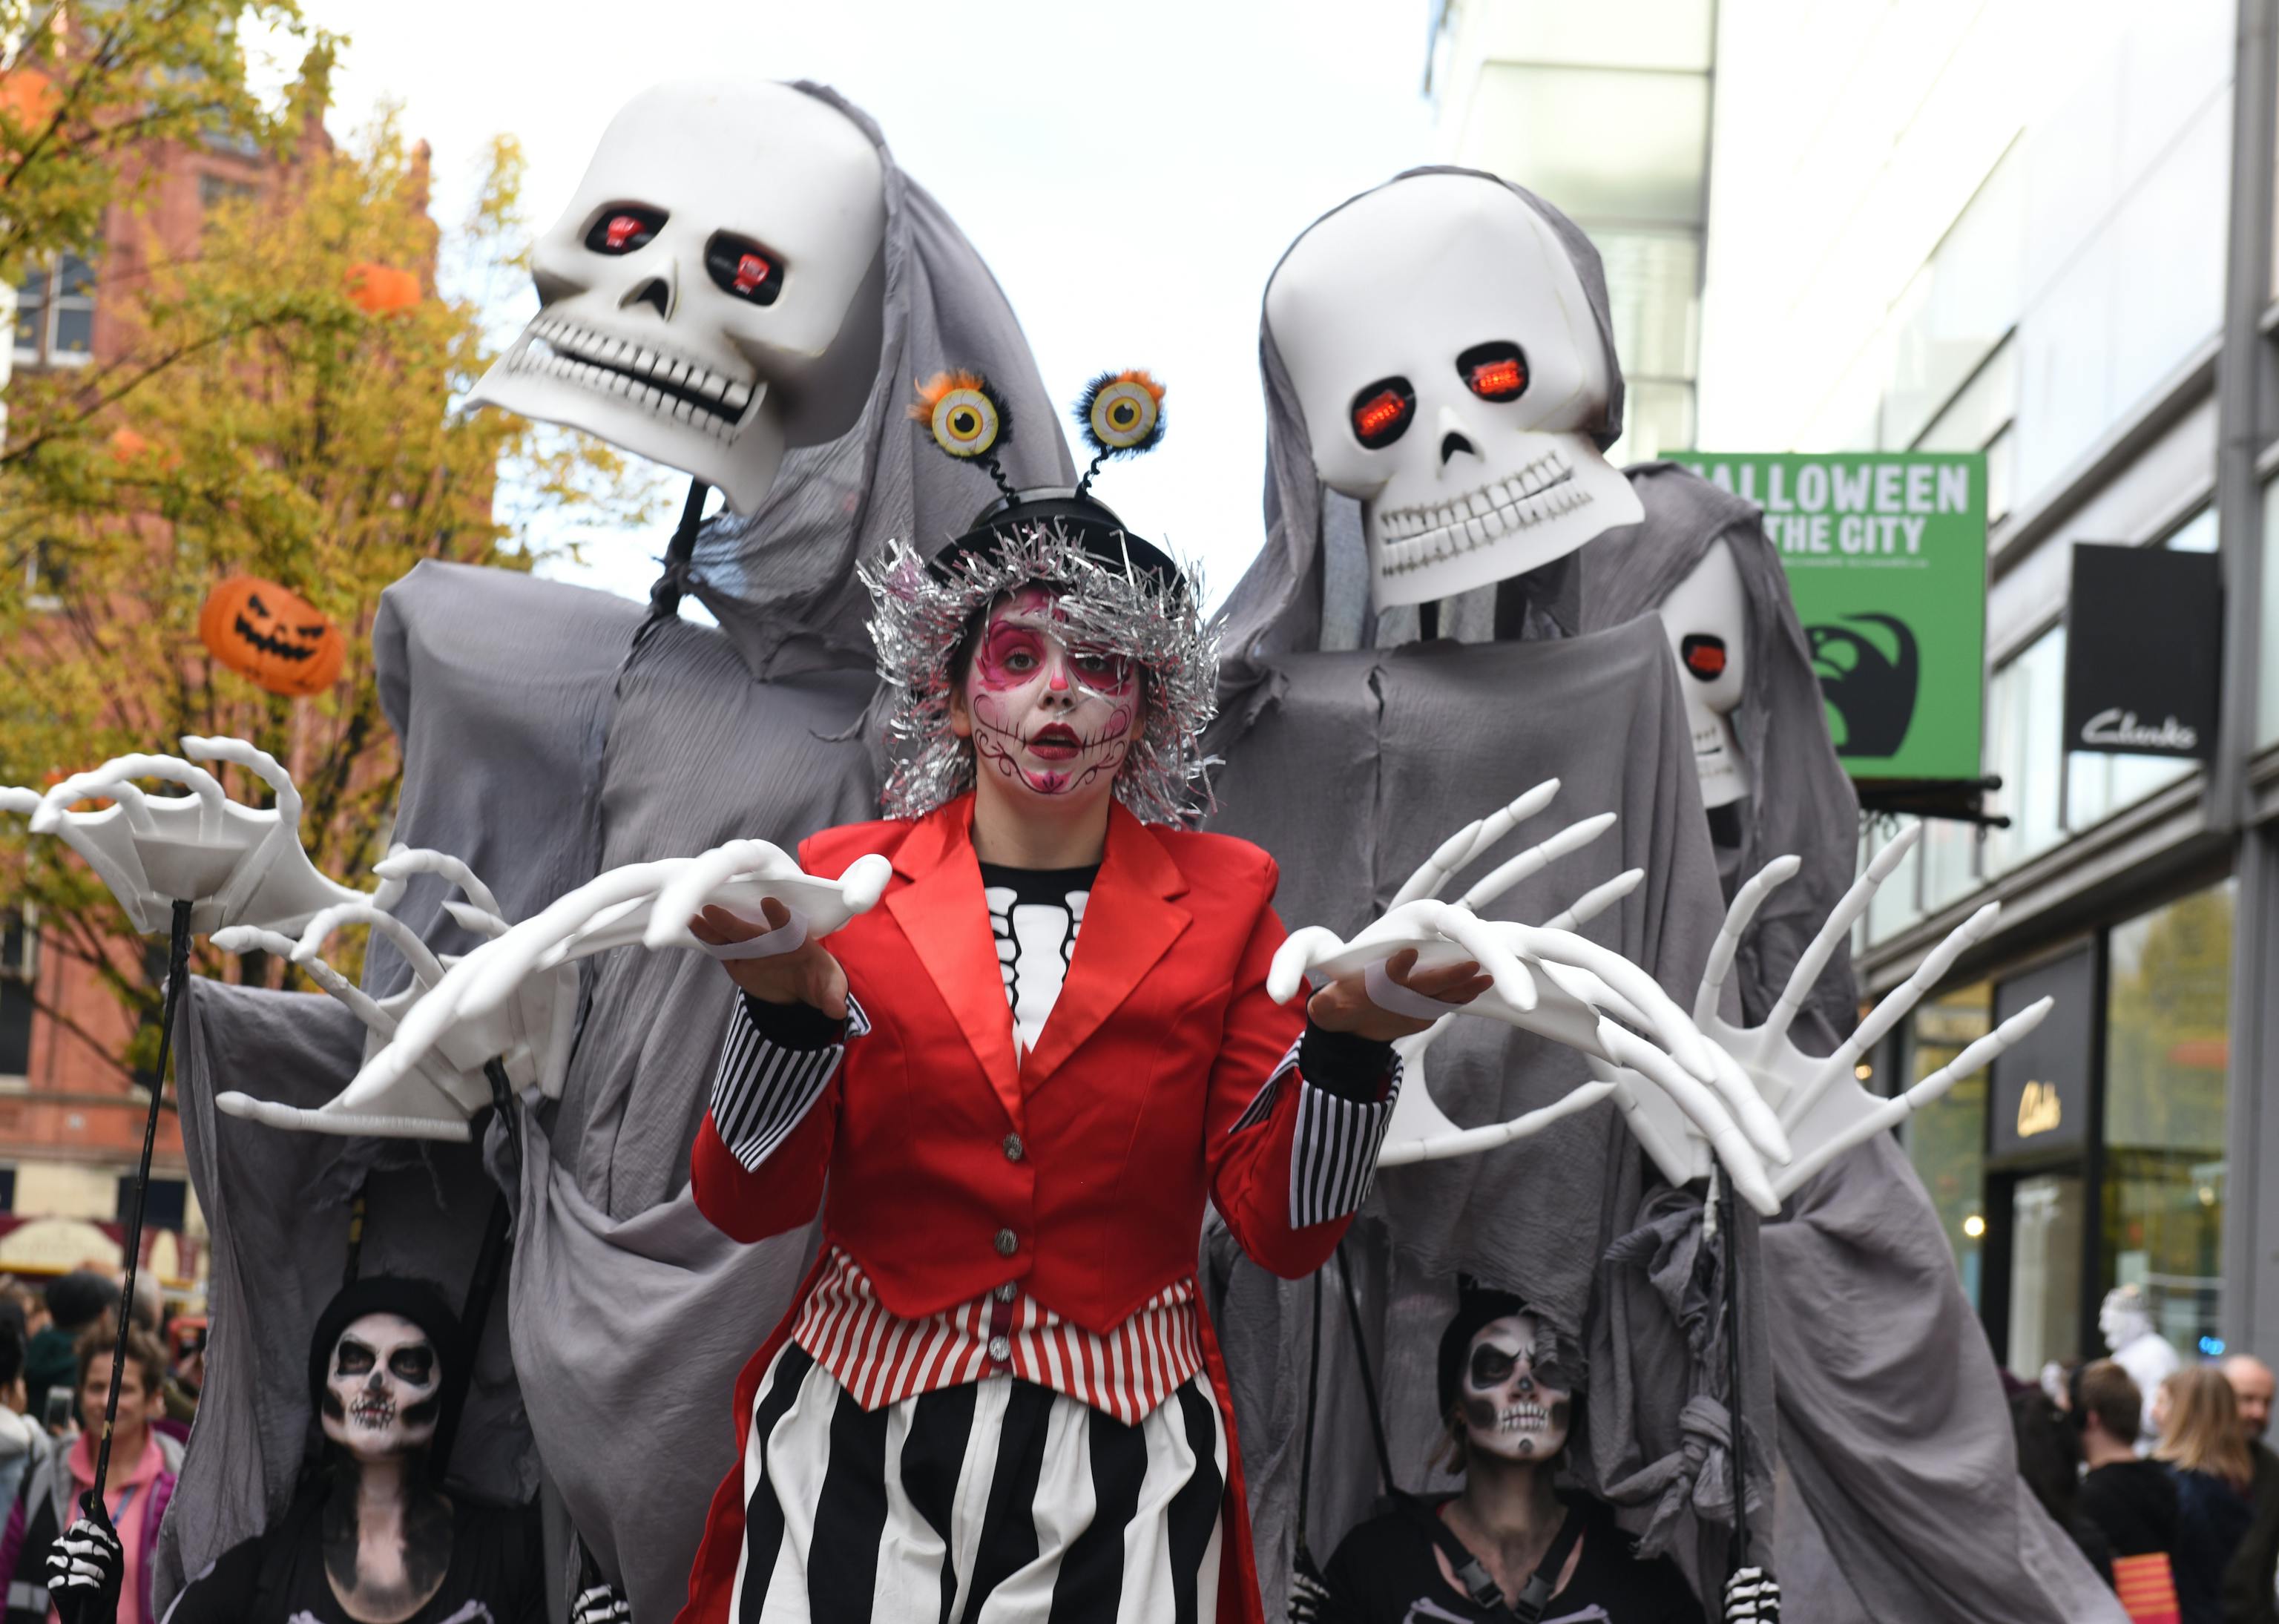 A performer in a red jacket and black and white striped trousers leads two large skeleton puppets through a town centre